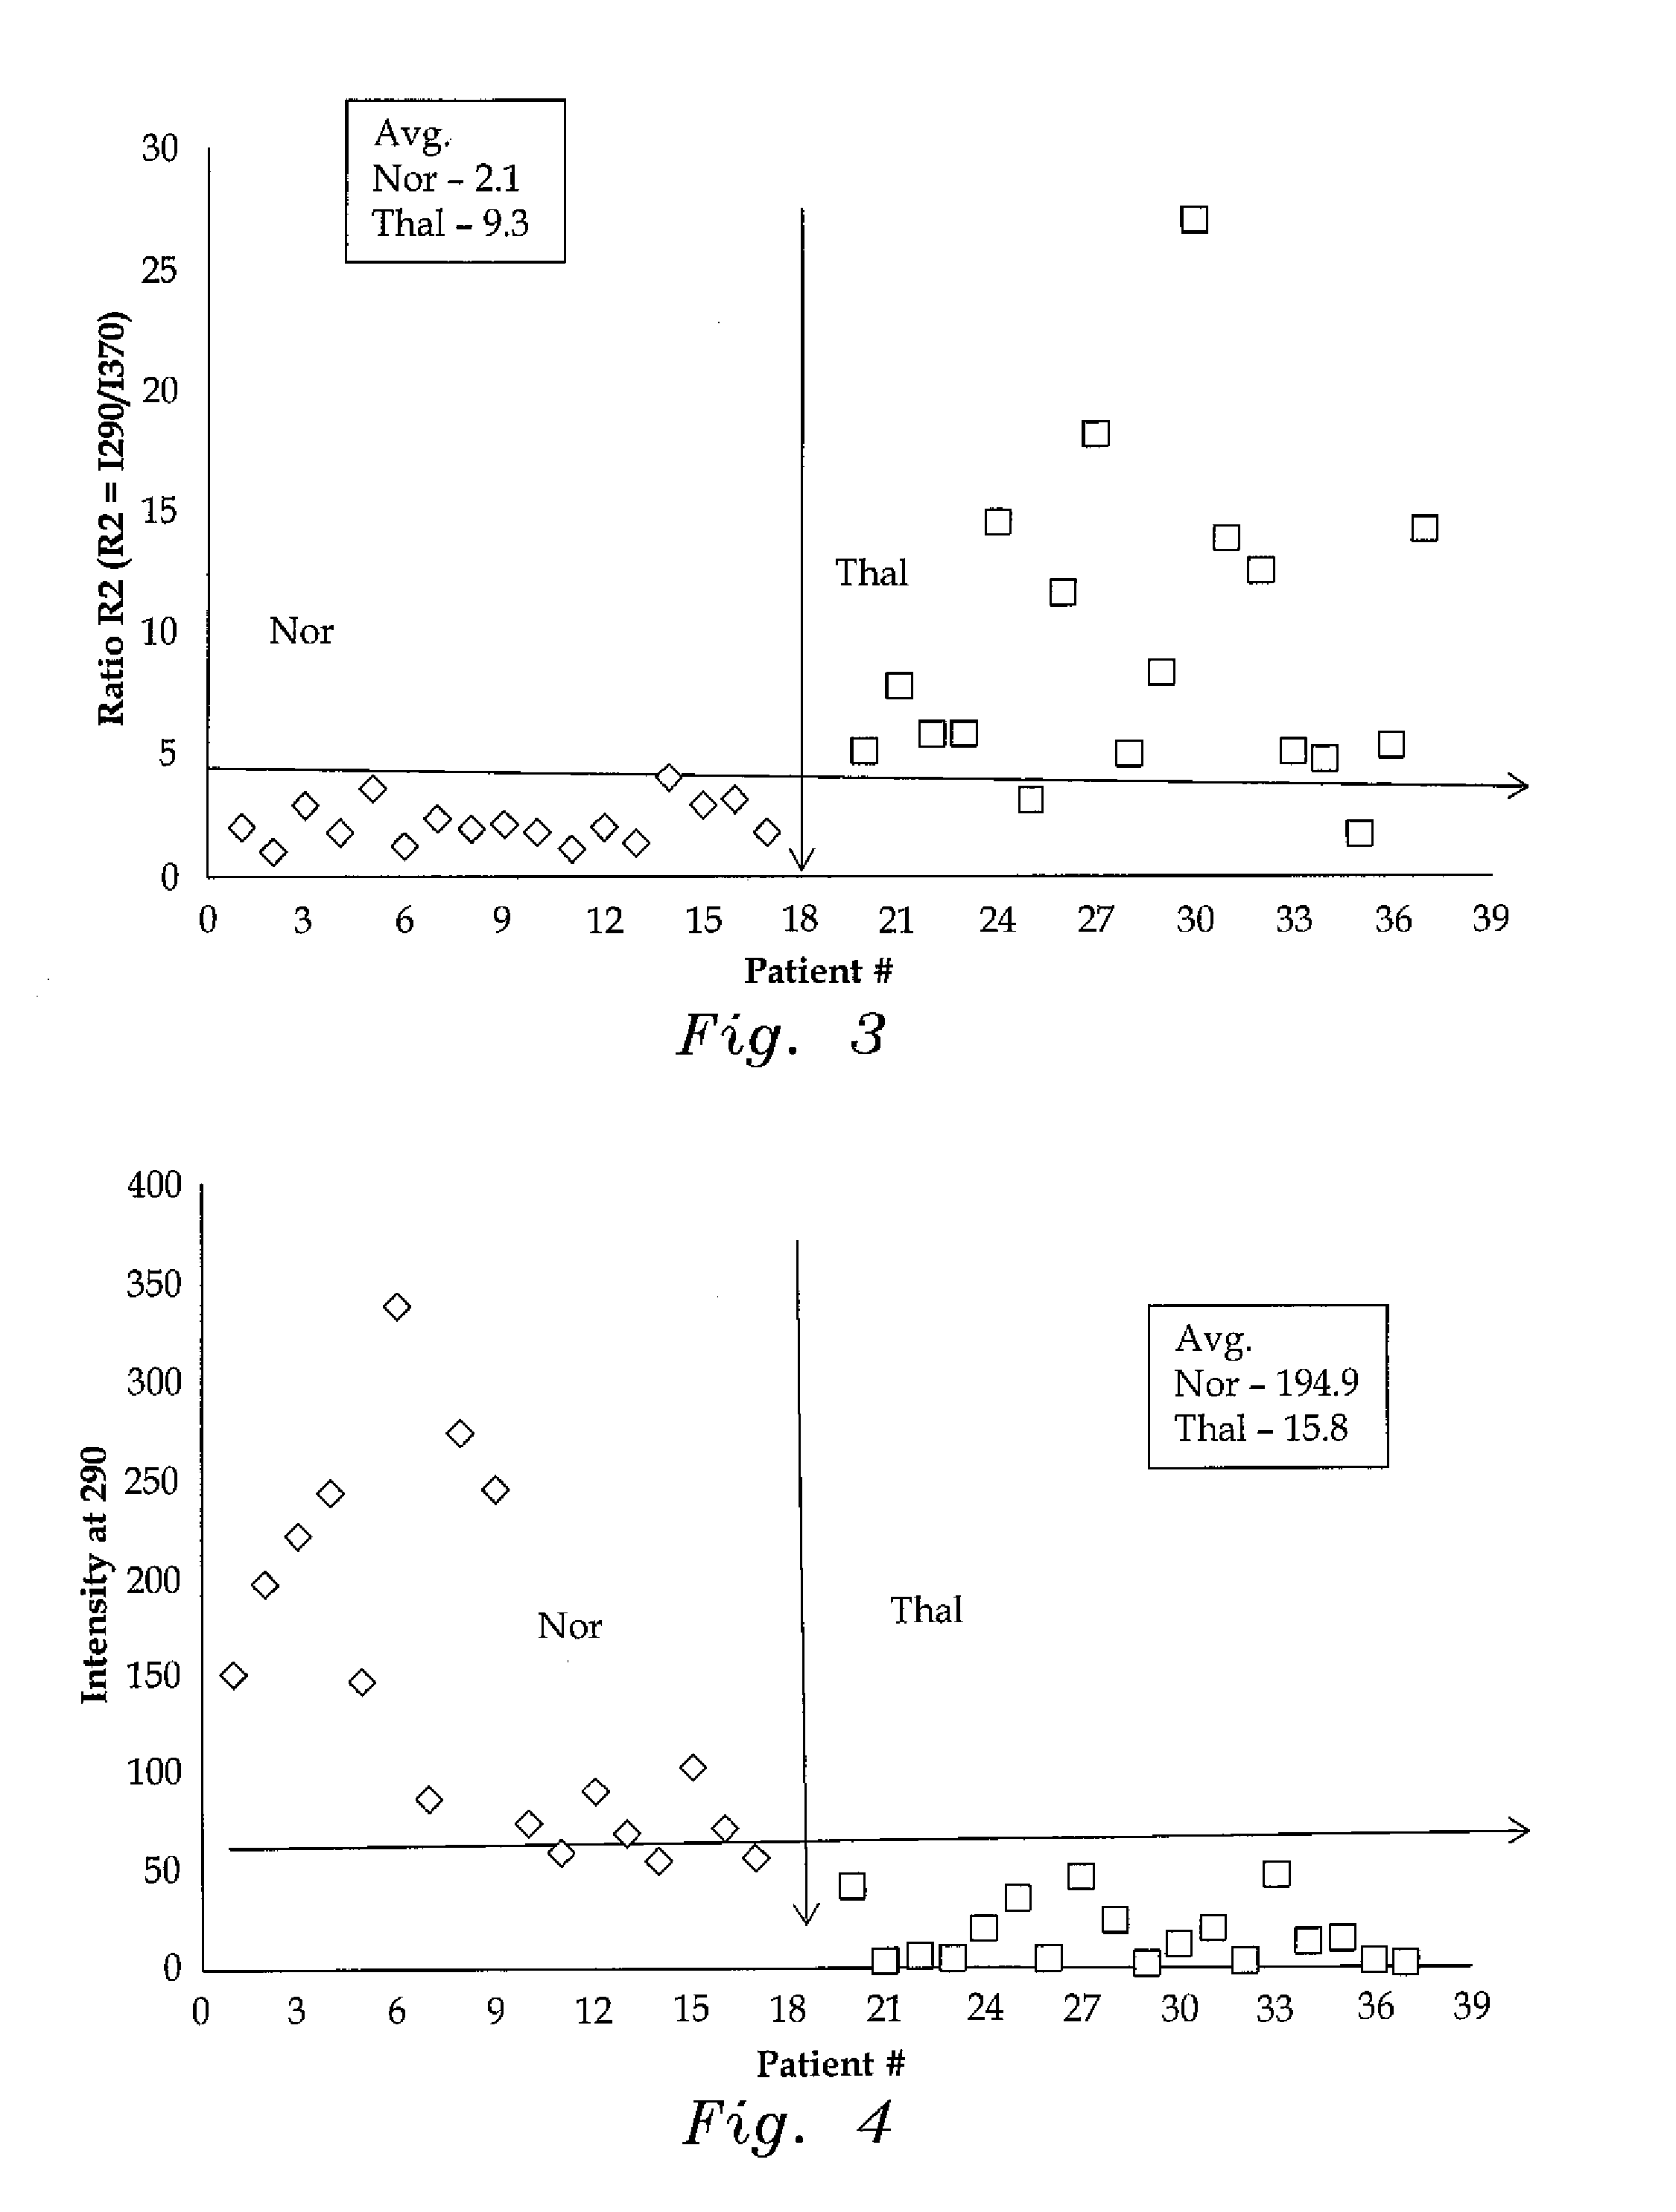 Method of detecting thalassemia by optical analysis of blood components